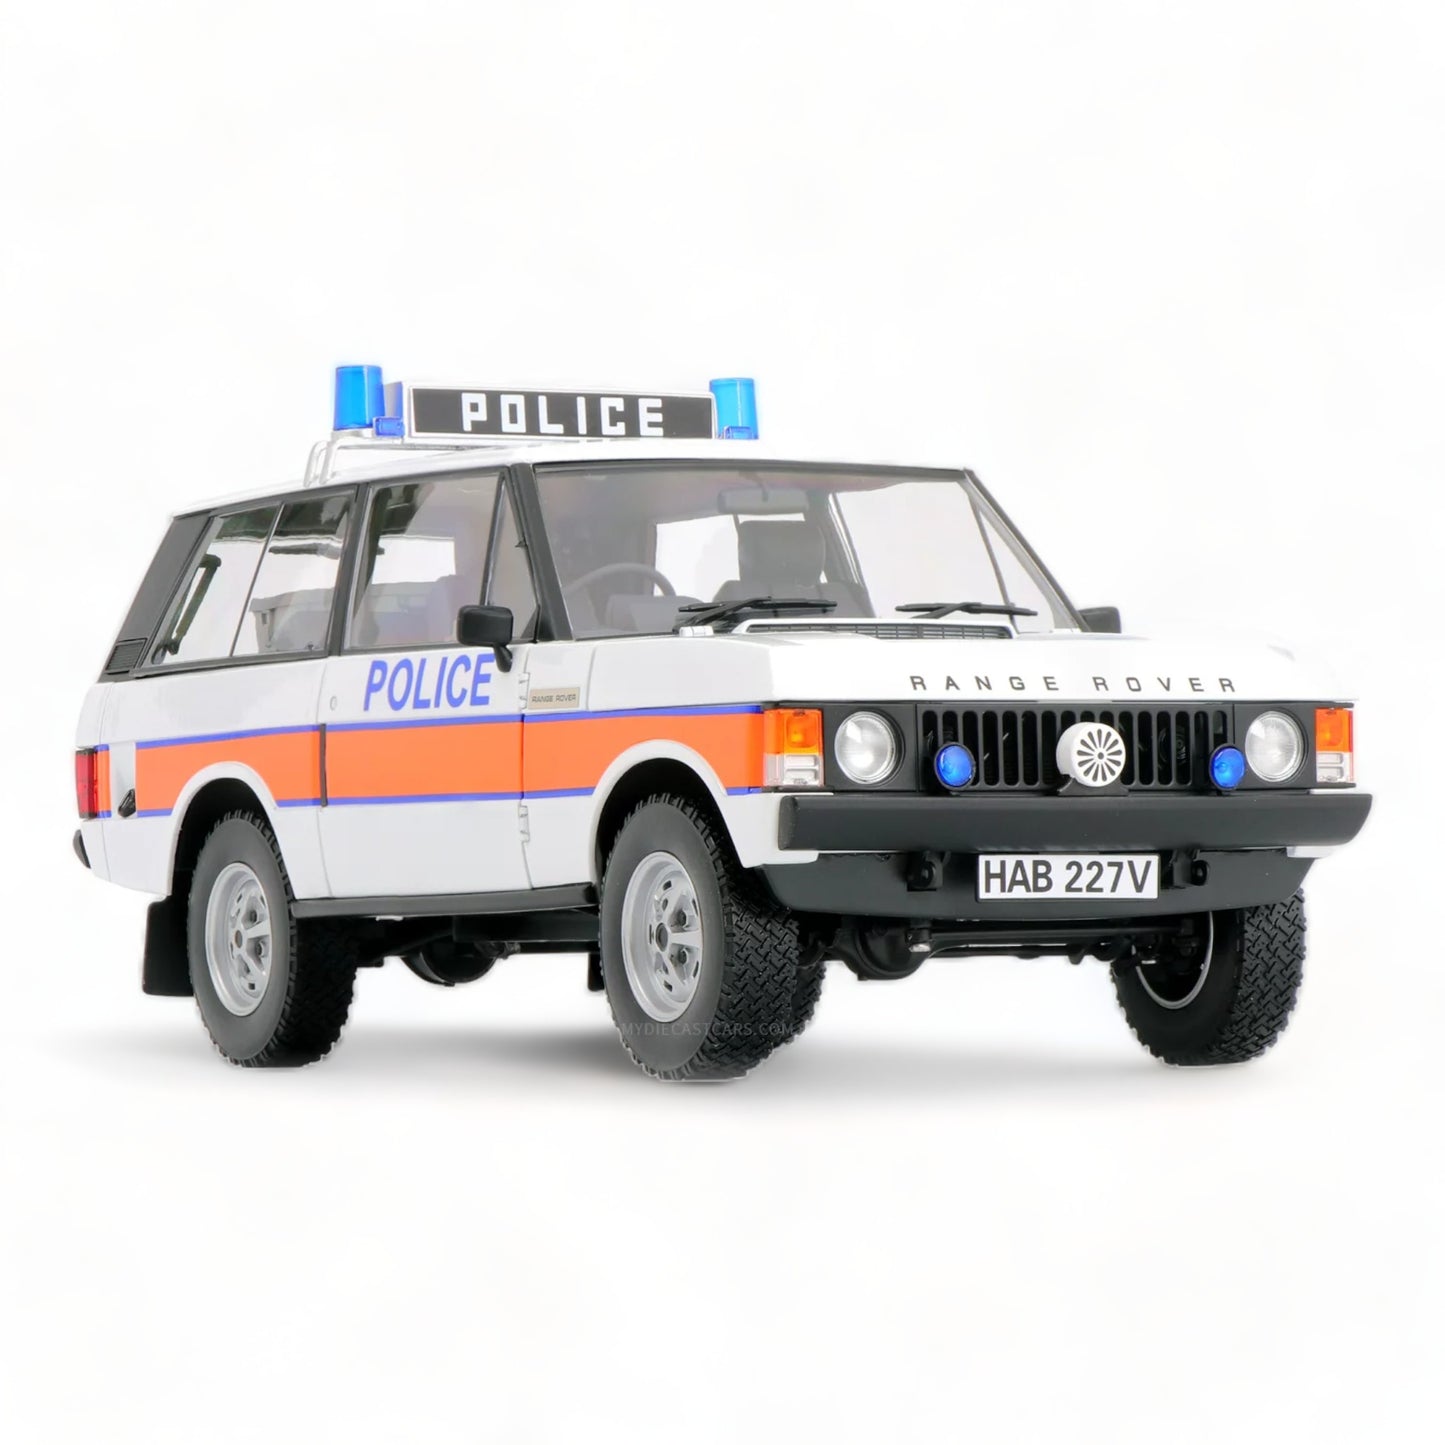 1/18 Diecast  Land Rover Range Rover Classic Police White 1970 by Almost Real Scale Model Car|Sold in Dturman.com Dubai UAE.